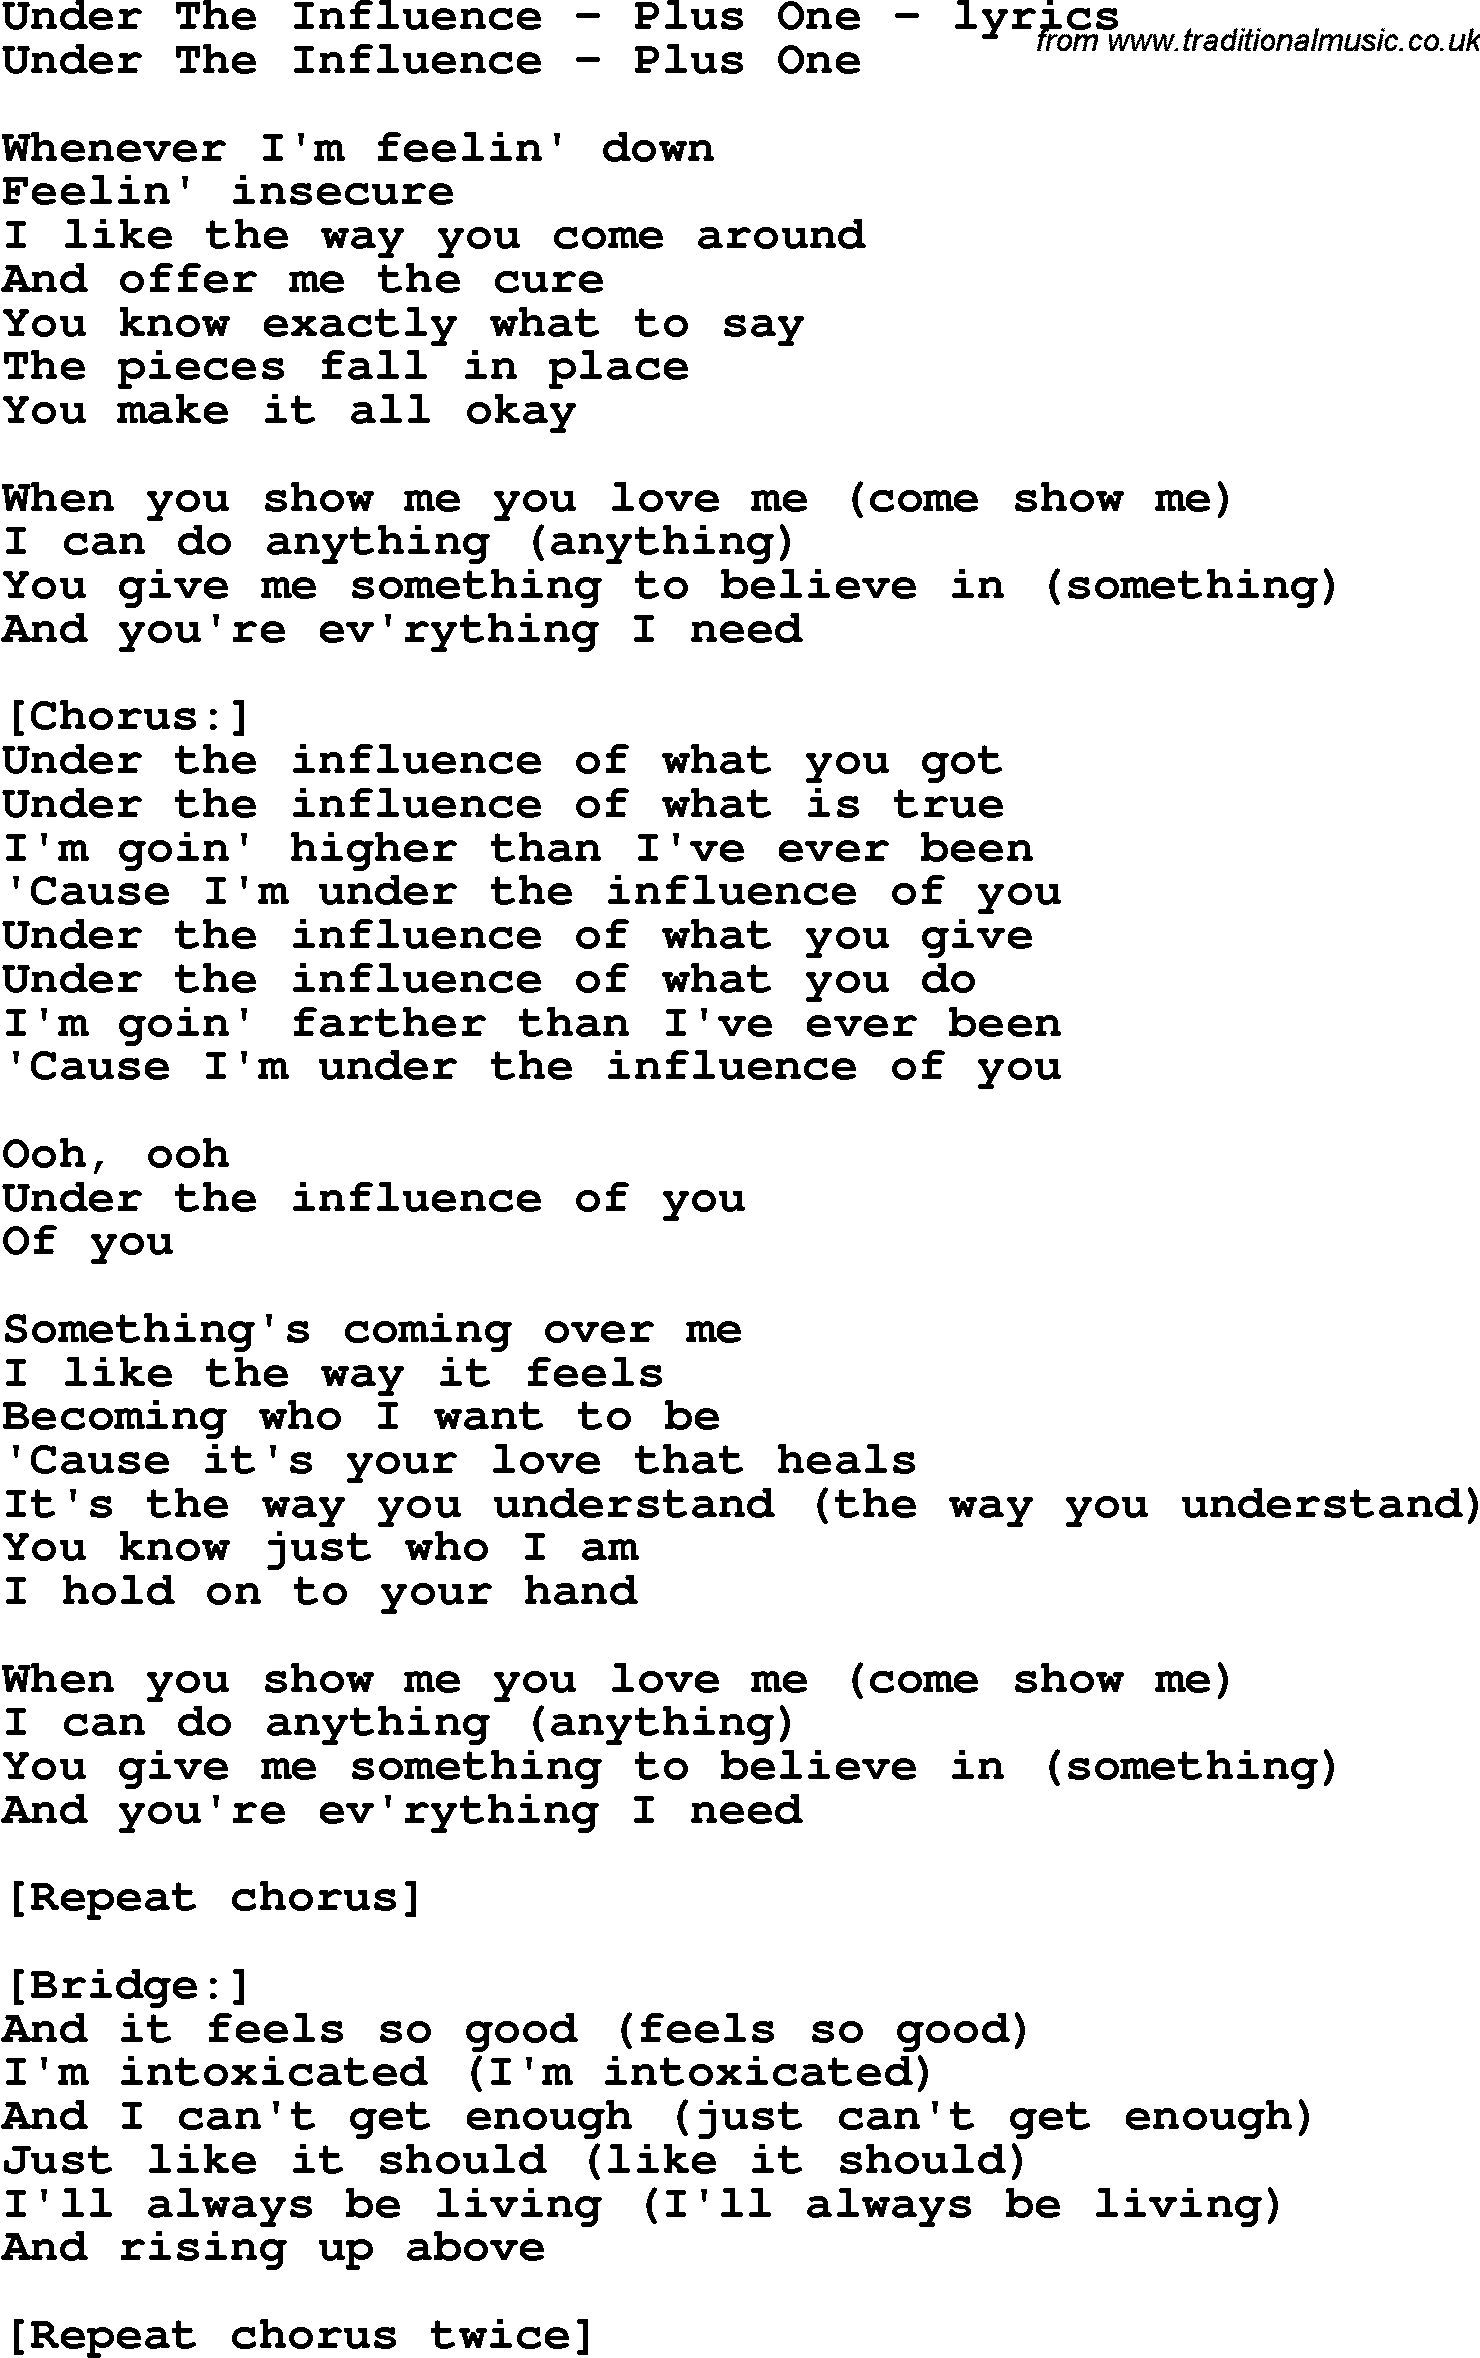 Love Song Lyrics for: Under The Influence - Plus One